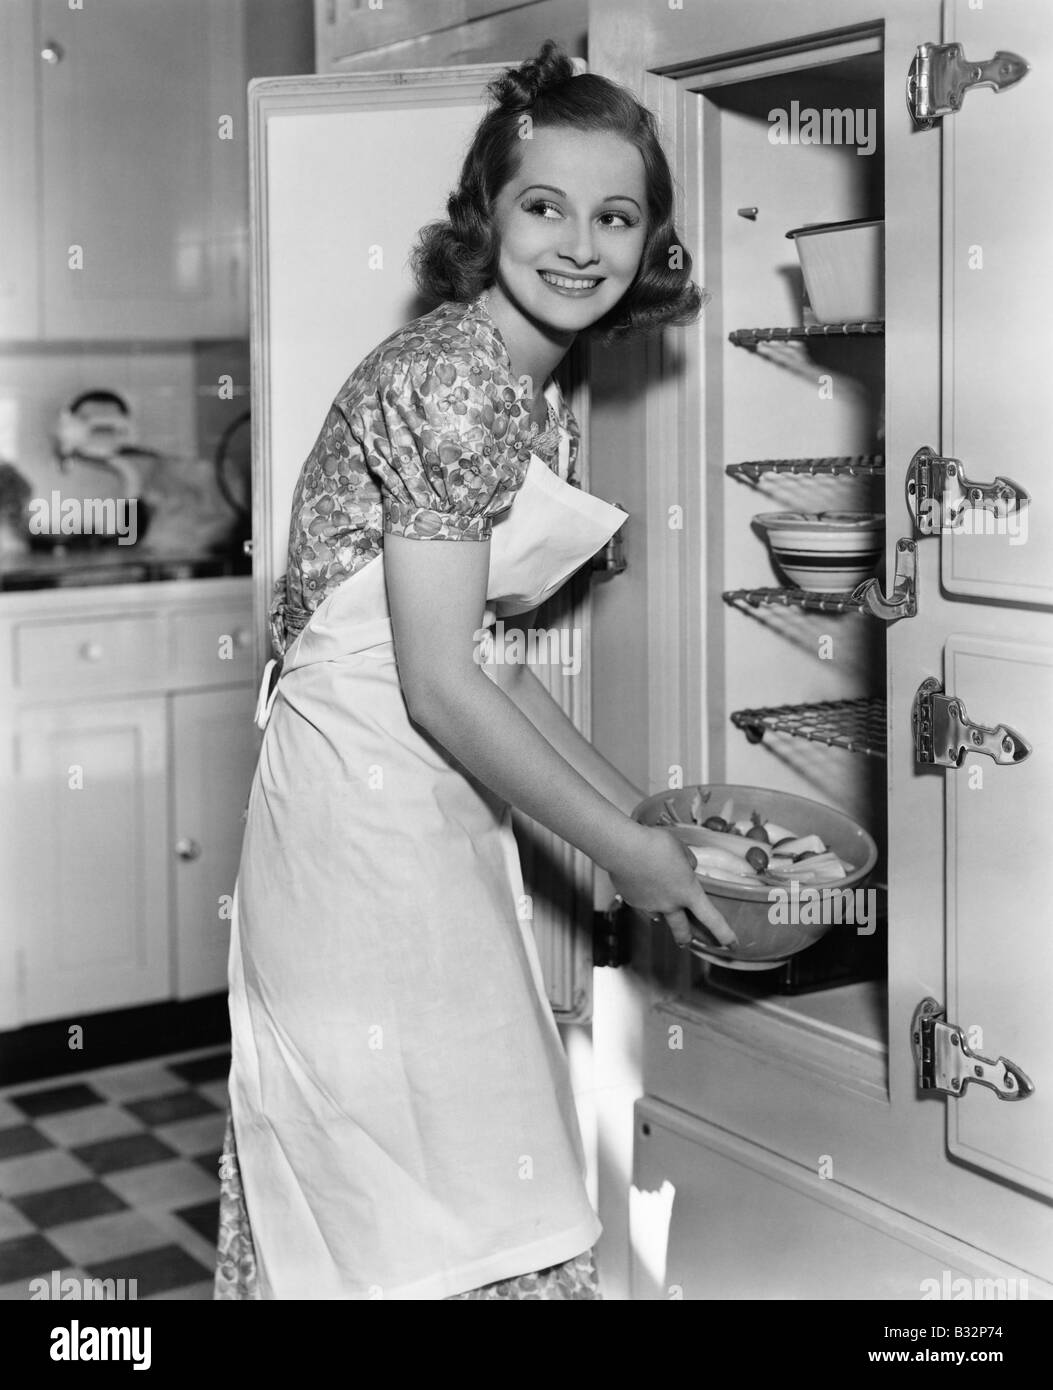 Portrait of woman in kitchen Stock Photo